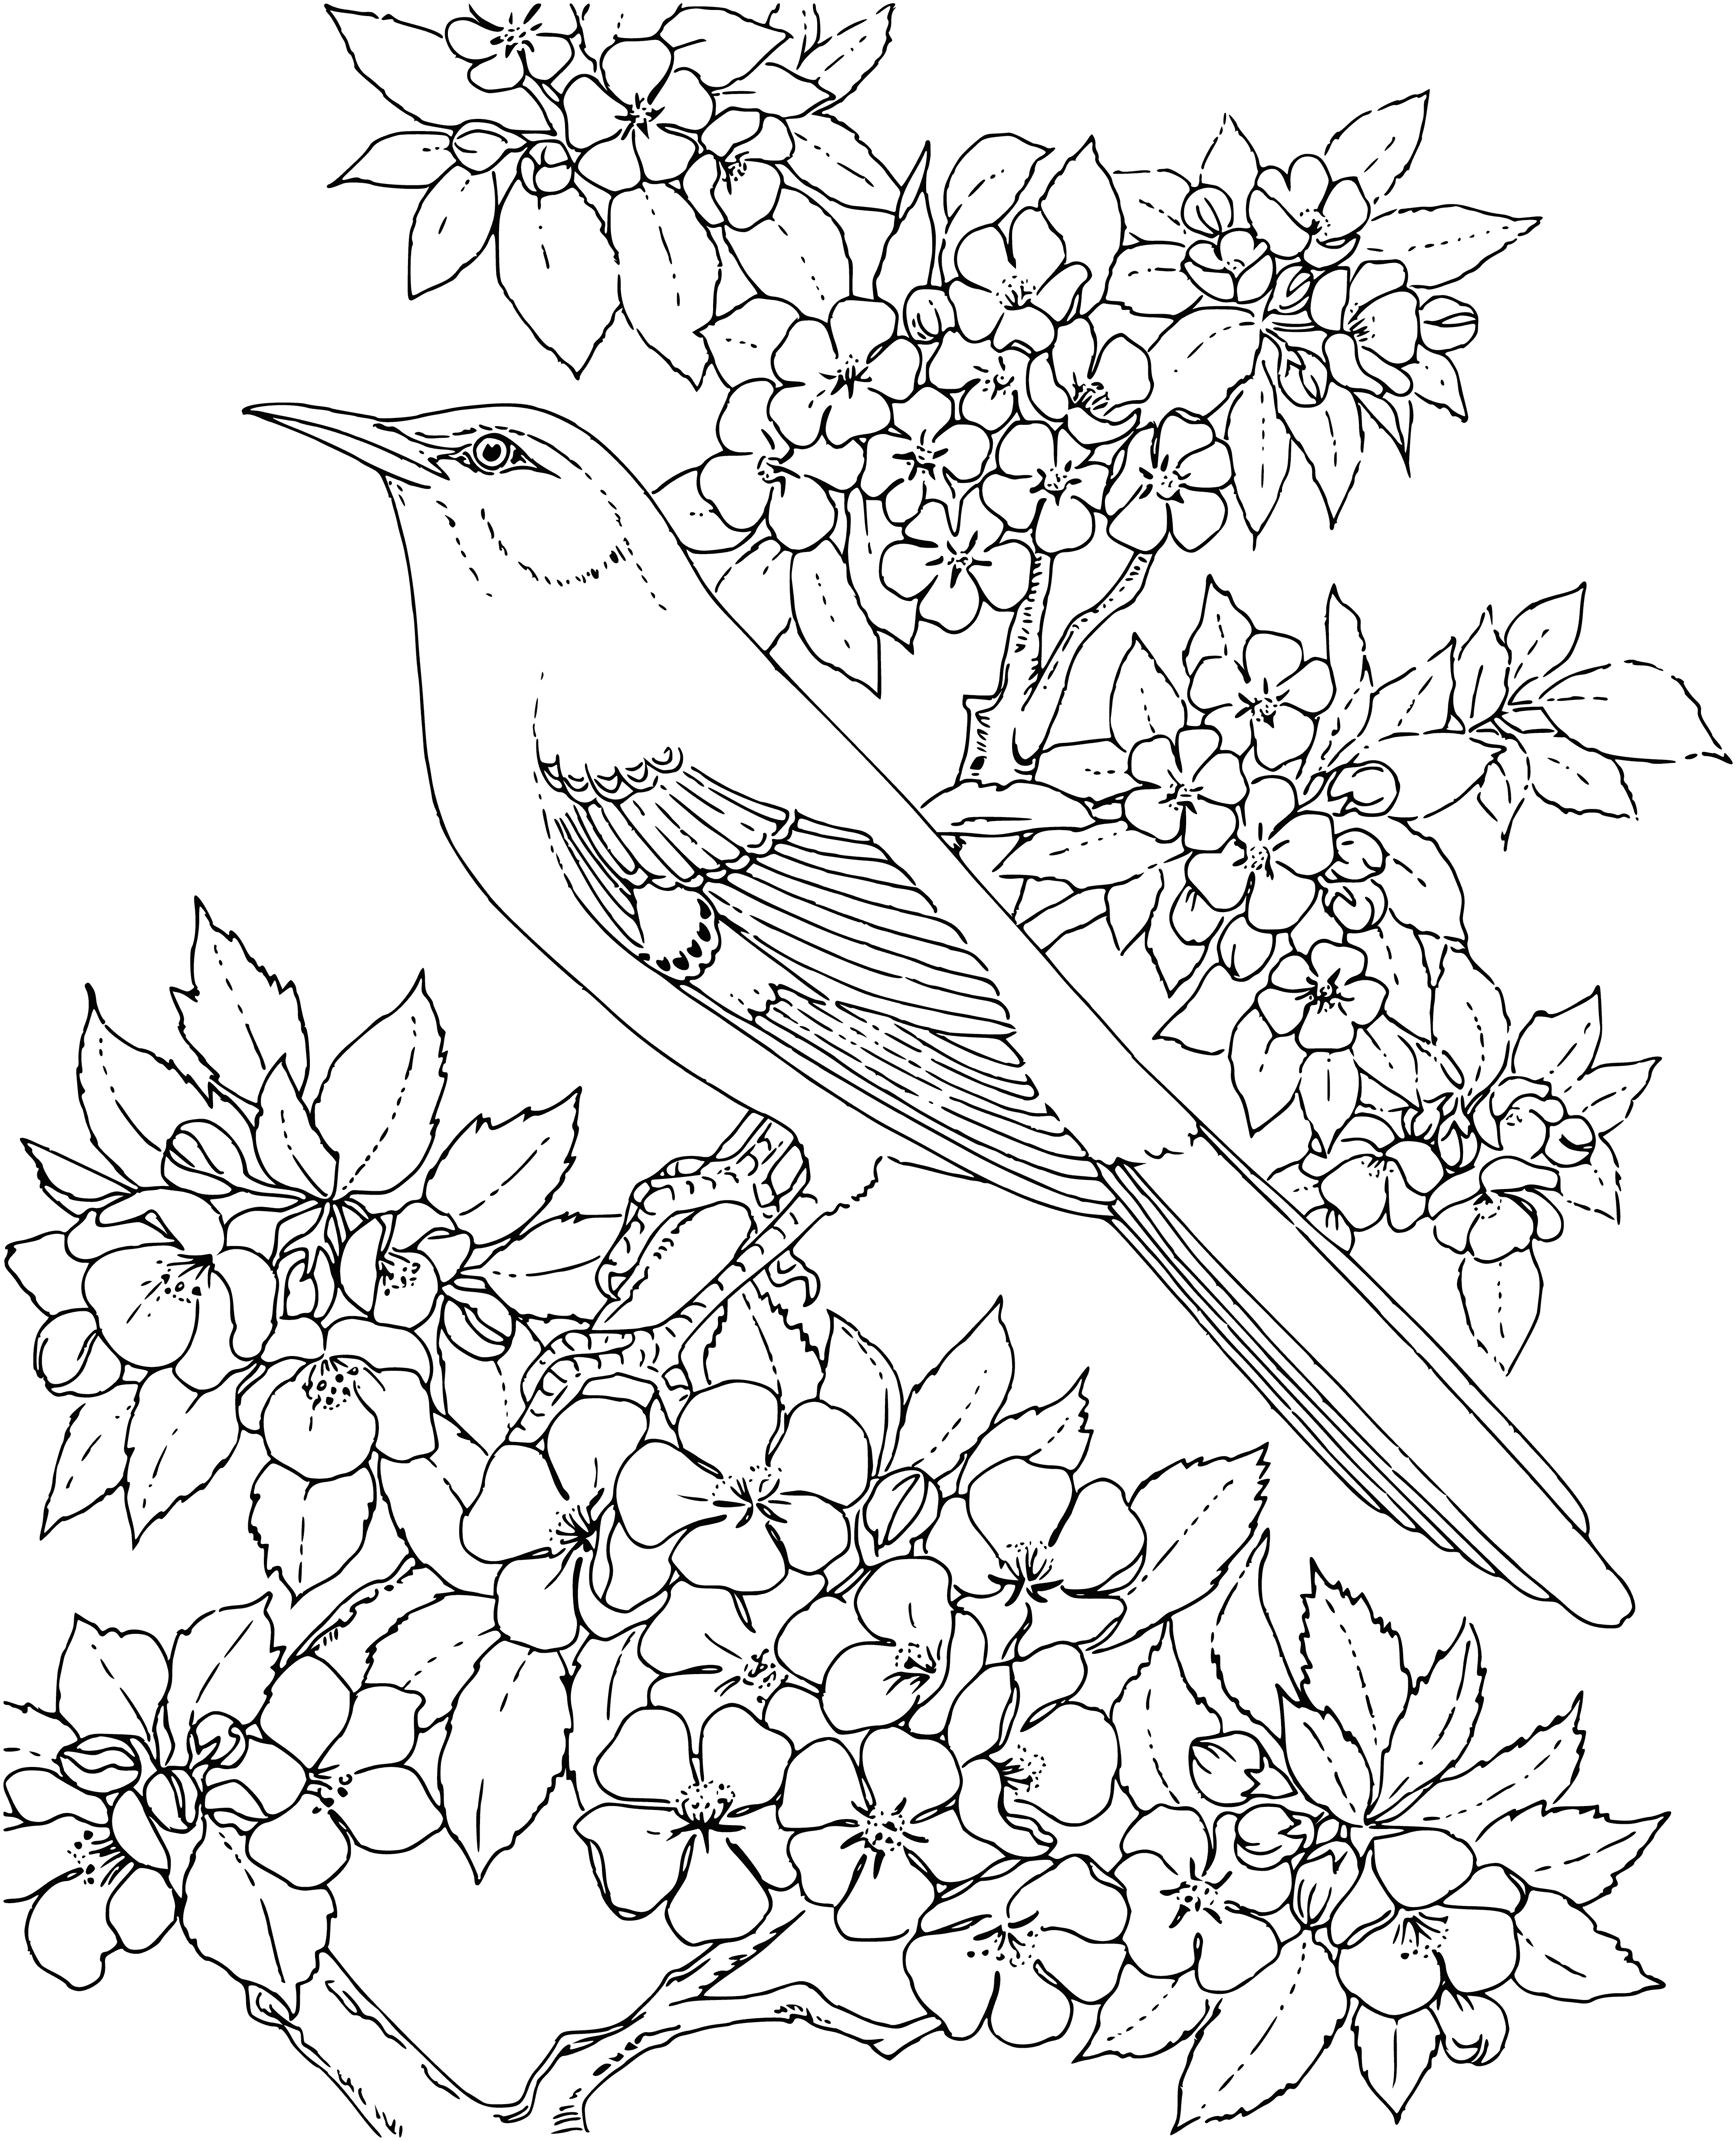 coloring page: A small bird with gray feathers and a black cap is perched on a branch with its long tail dangling.